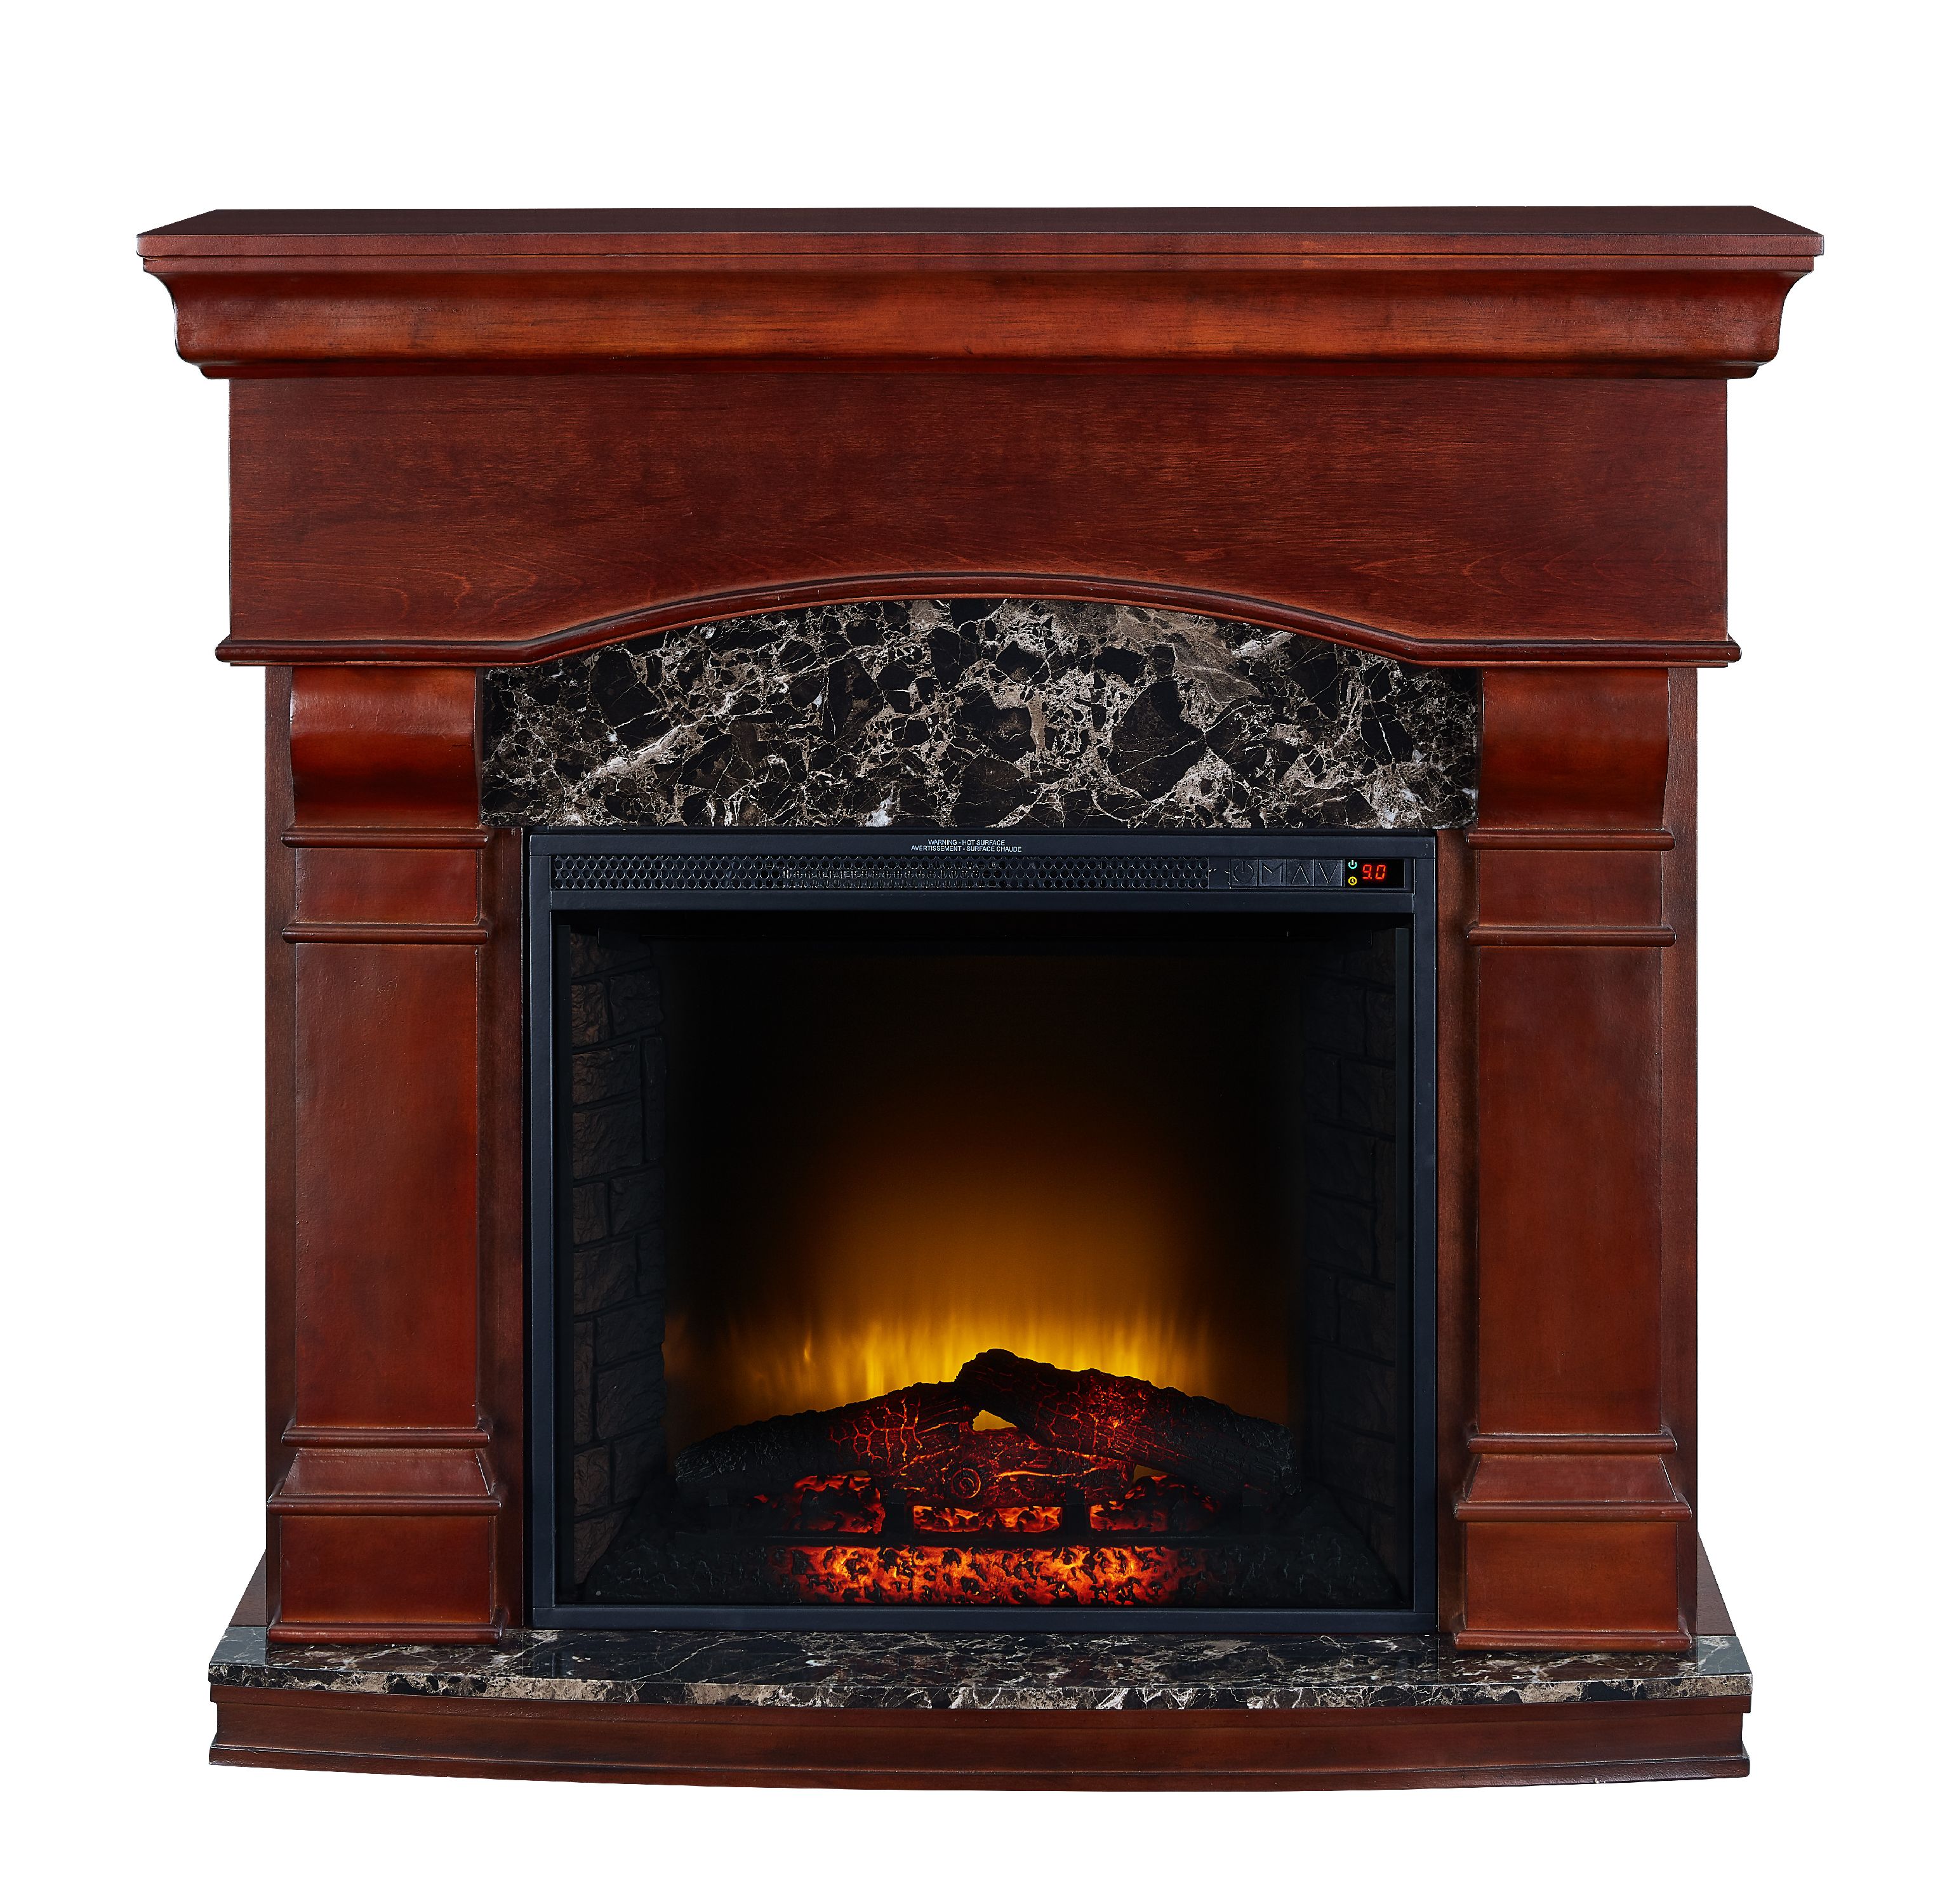 Bold Flame 47 inch Electric Fireplace in Walnut - image 2 of 5